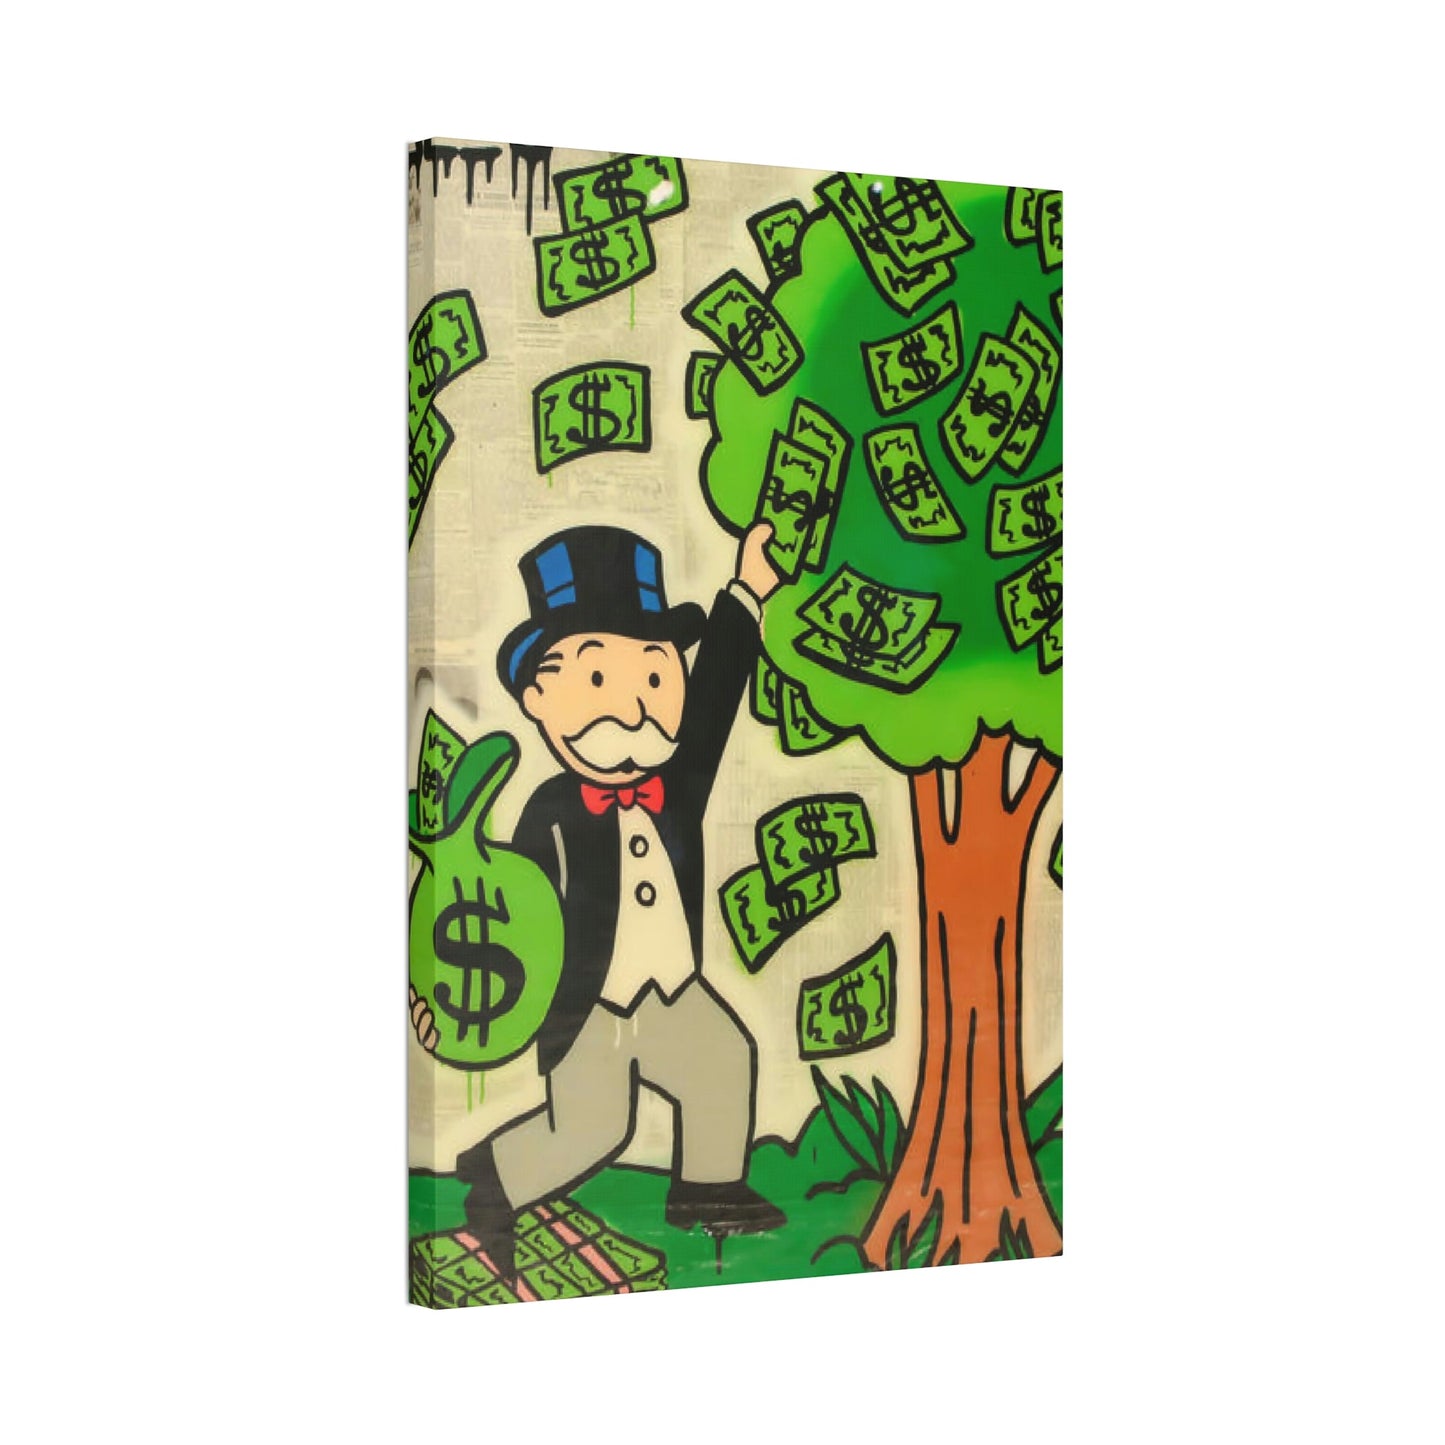 Colorful Urban Expression: Alec Monopoly on Canvas and Framed Poster